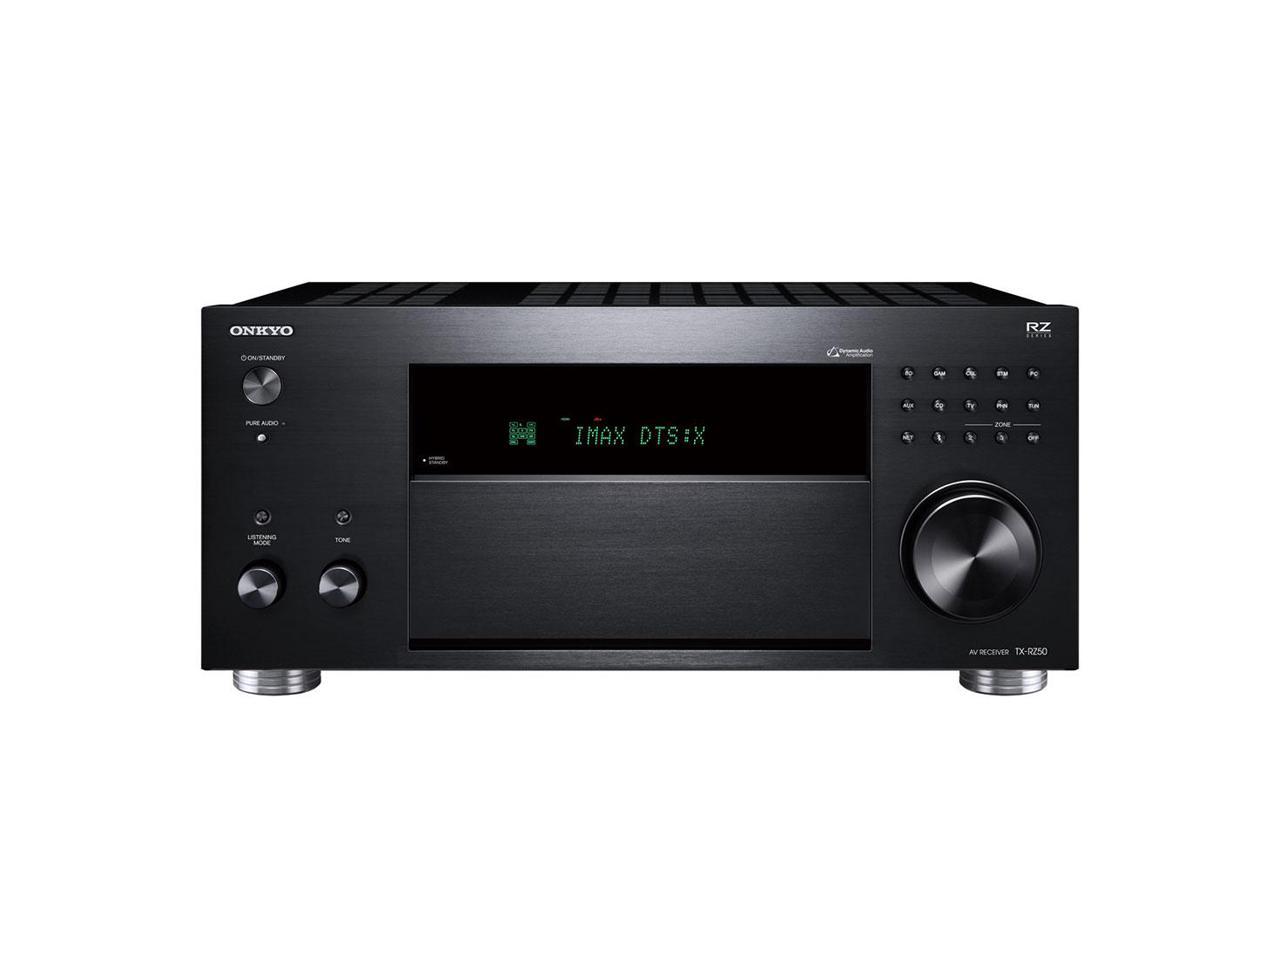 Onkyo TX-RZ50 9.2 Channel Network A/V Receiver + $1200 + free s/h